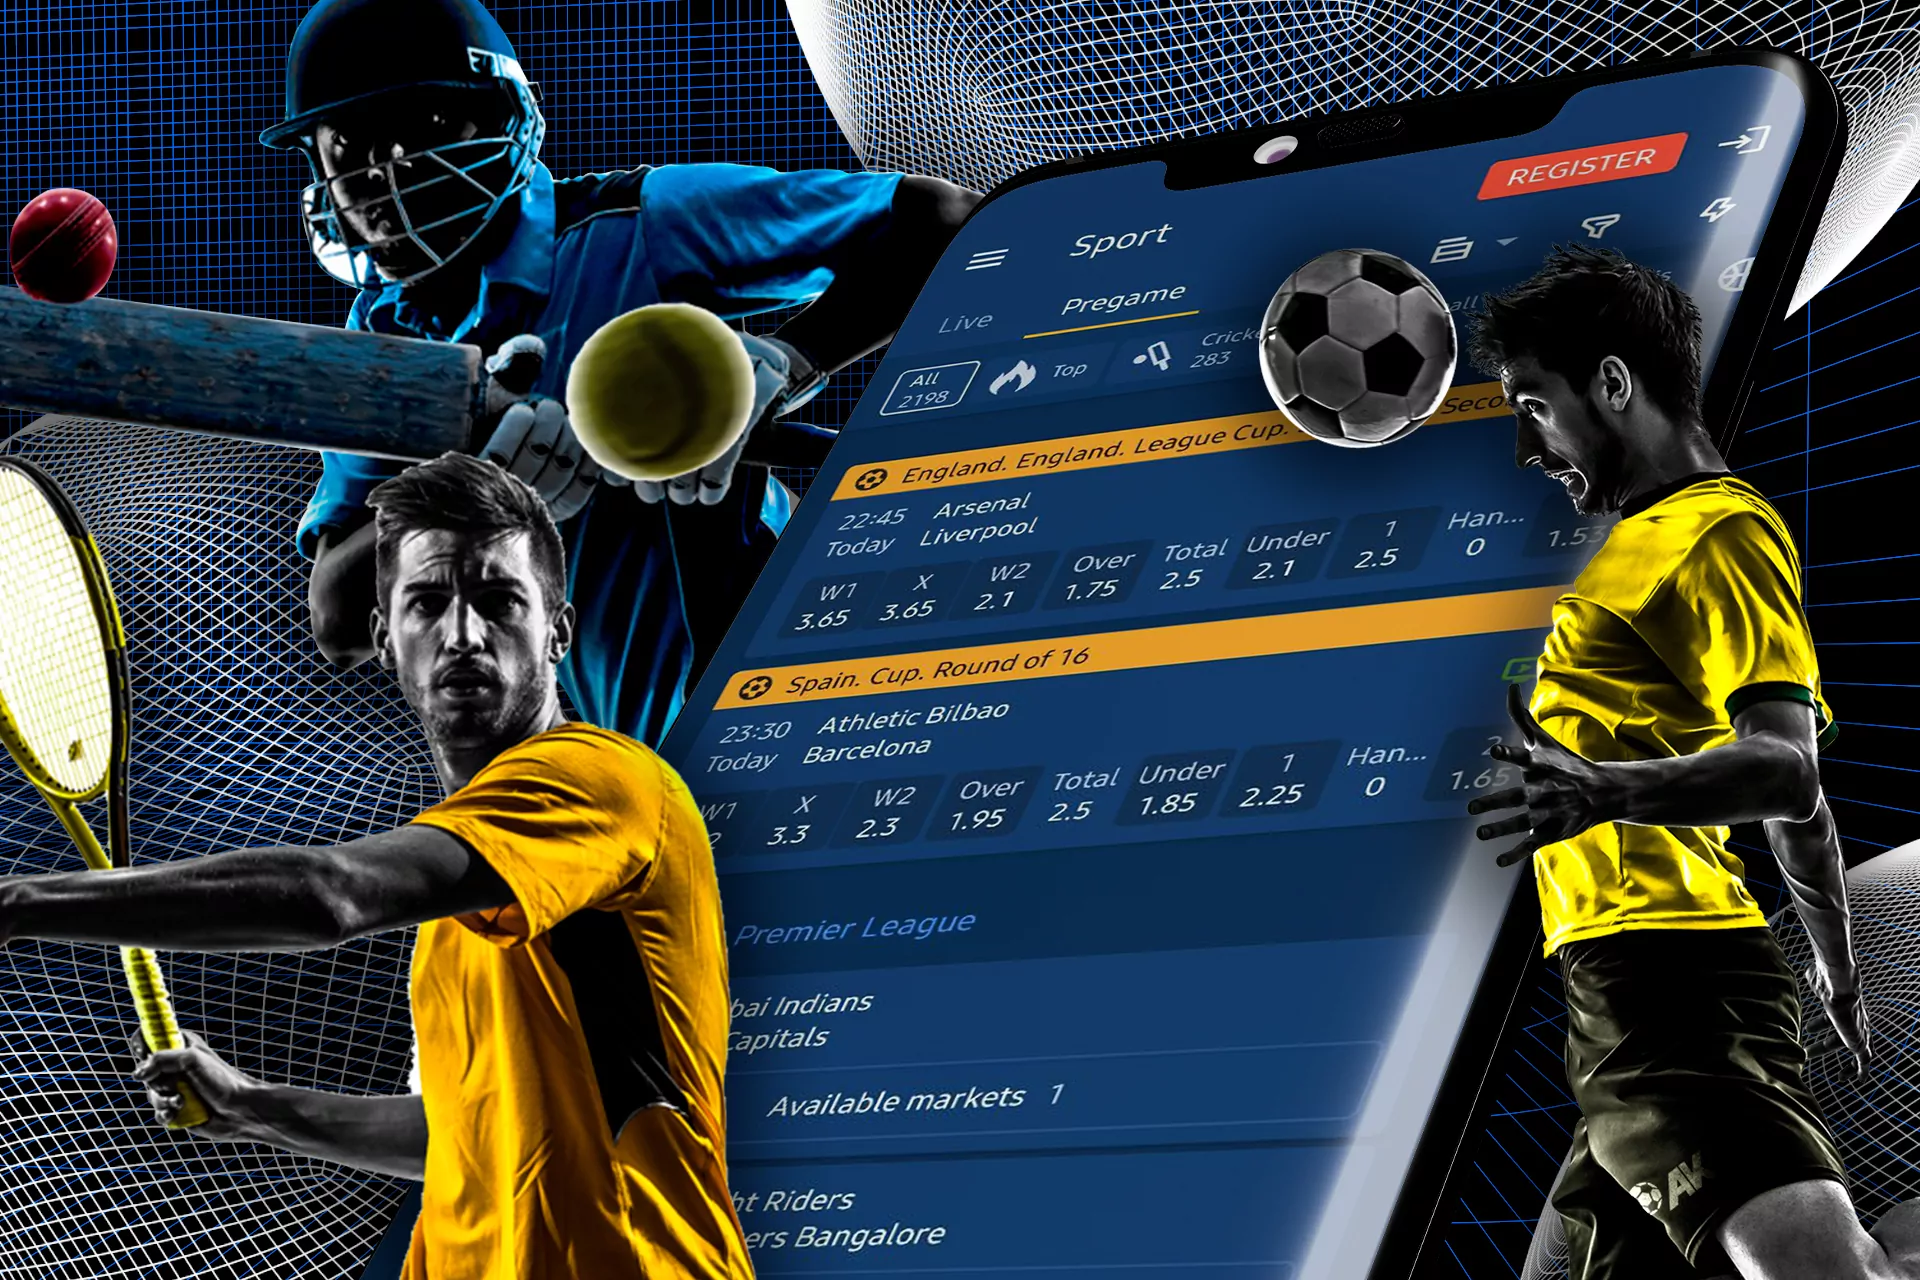 Types of sports betting available to players through the Mostbet app.